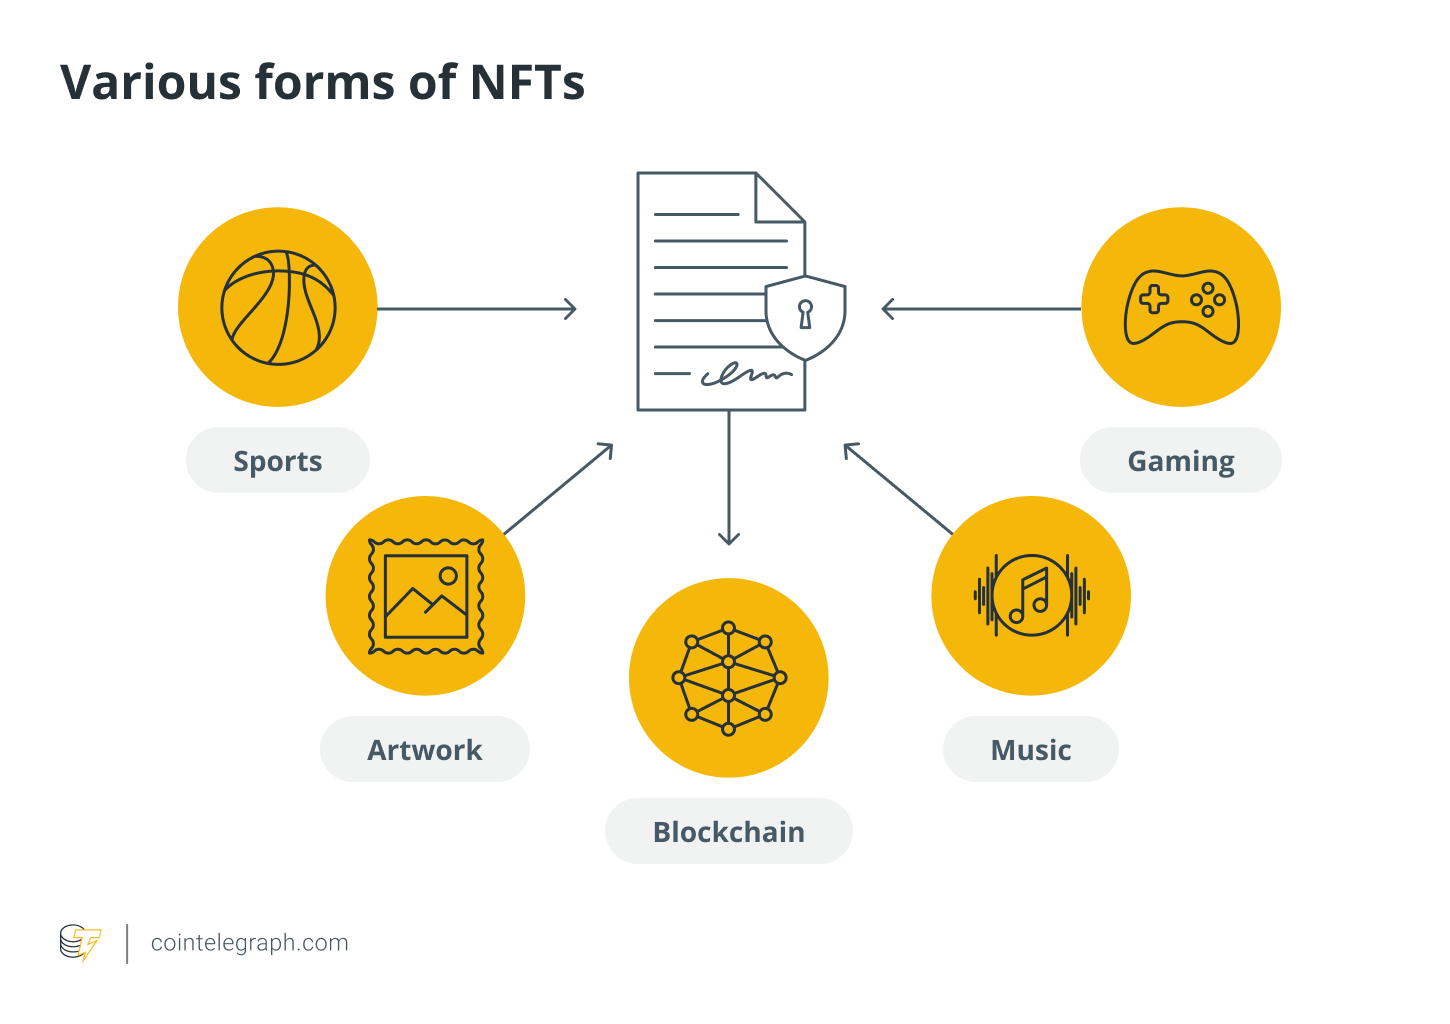 Nfts Come In Various Forms, Making Them Complicated To Manage From A Legal Standpoint.